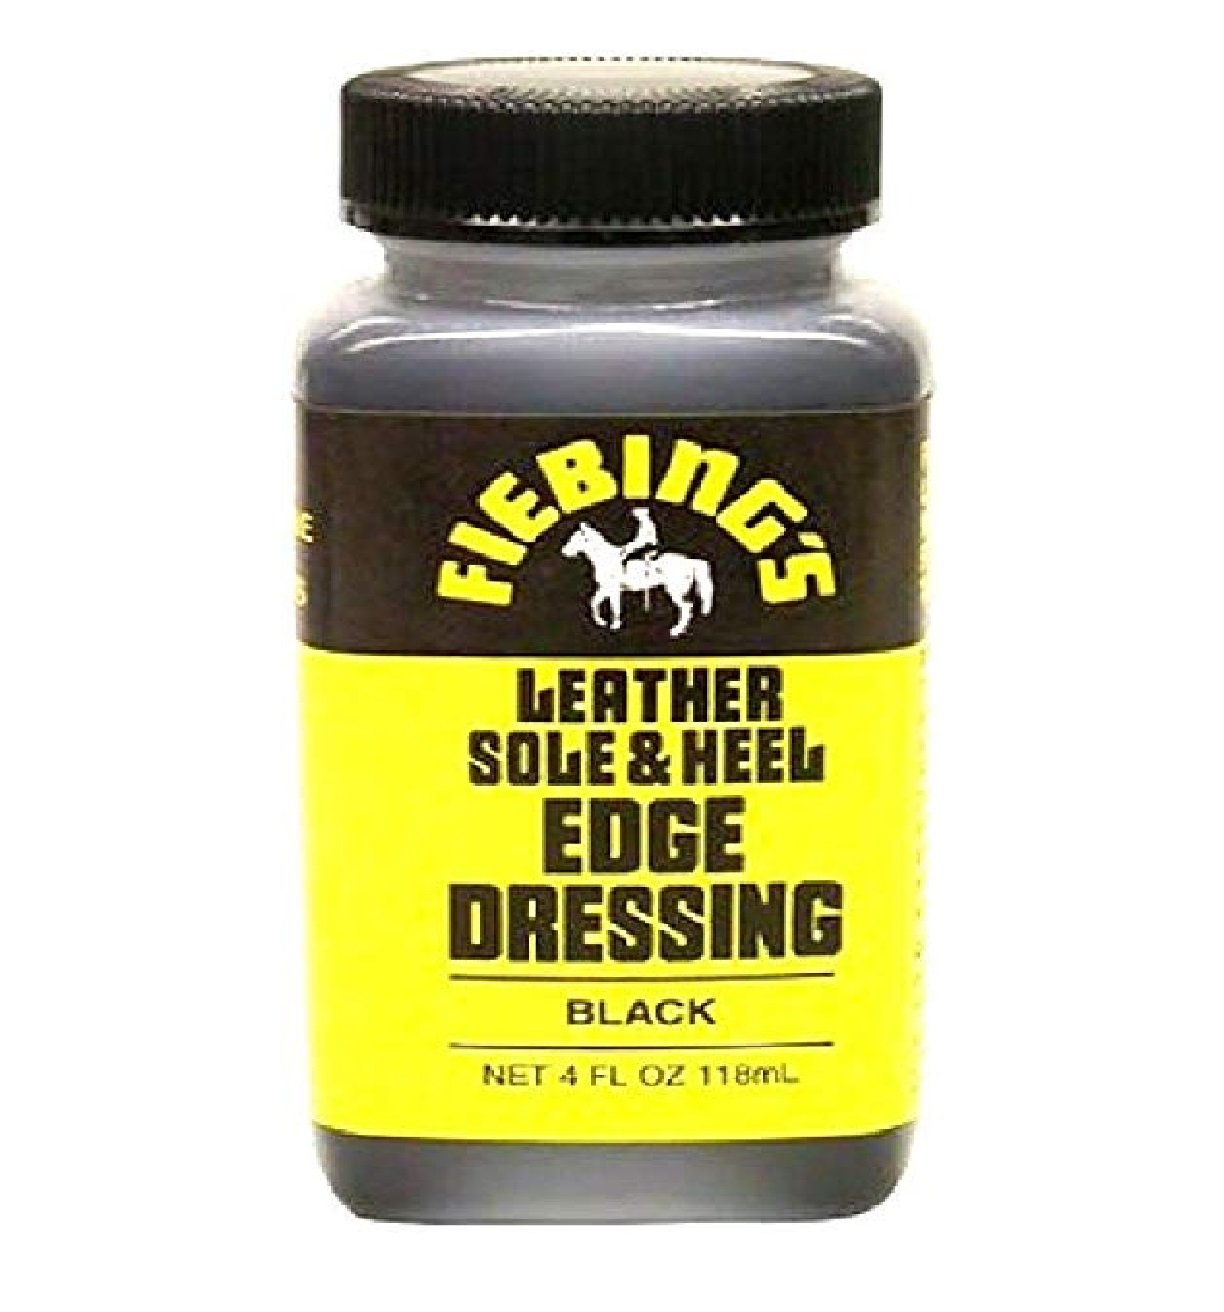 Edge Dressing Cowboy Boots, A quick edge dressing job will change the  appearance of your shoes / boots. Info links below. ----> Selling Our Soles  #shoeshine #shinebox #asmr